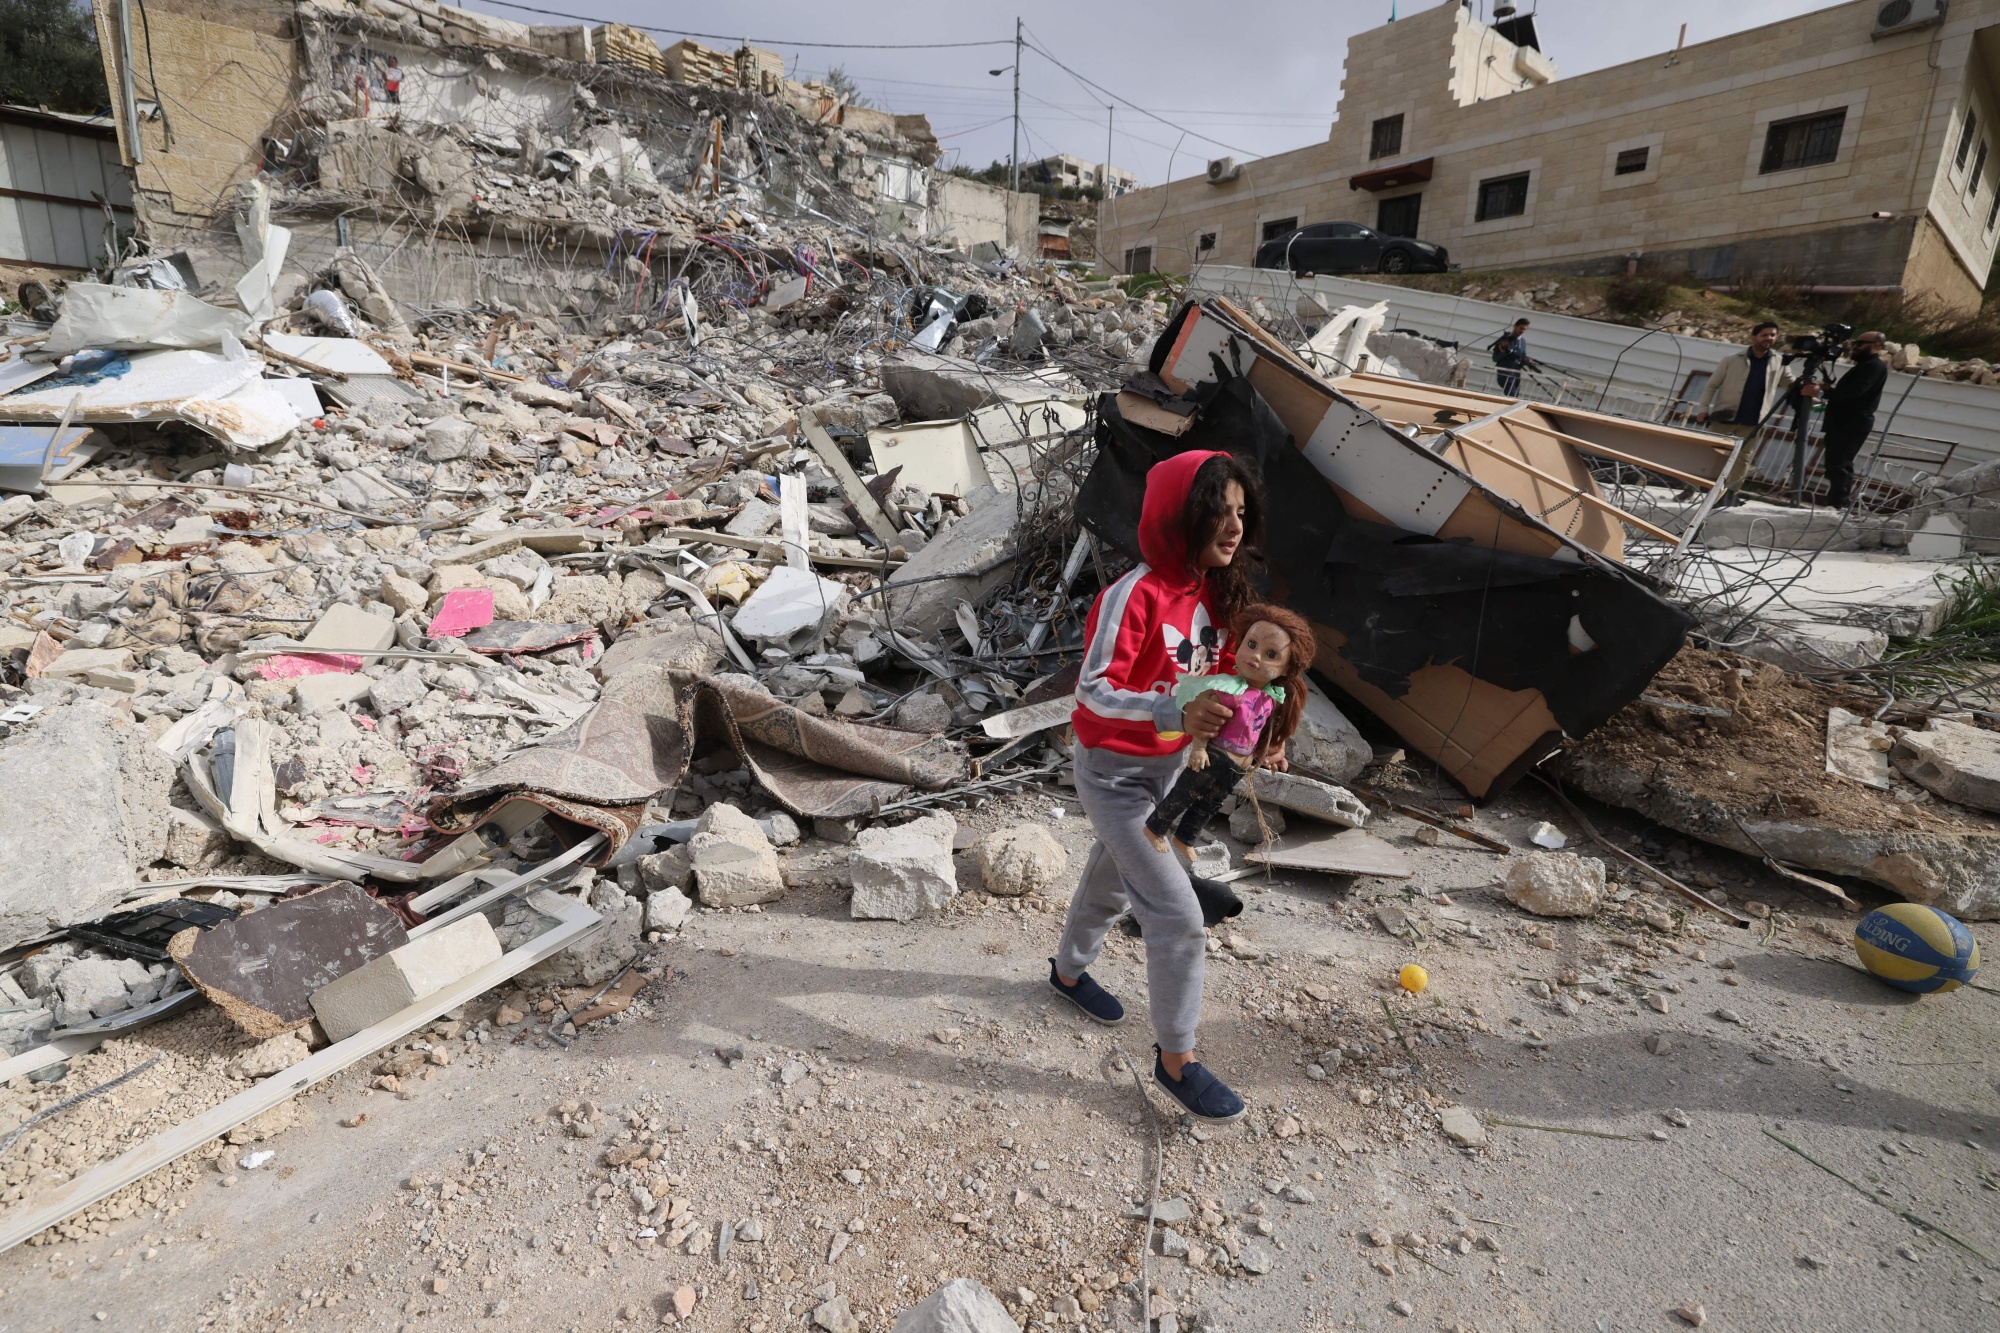 The debris of the house of Rateb Hatab Shukairat, after it was demolished by Israeli bulldozers, in Jabal Mukaber on Jan.&nbsp;29.